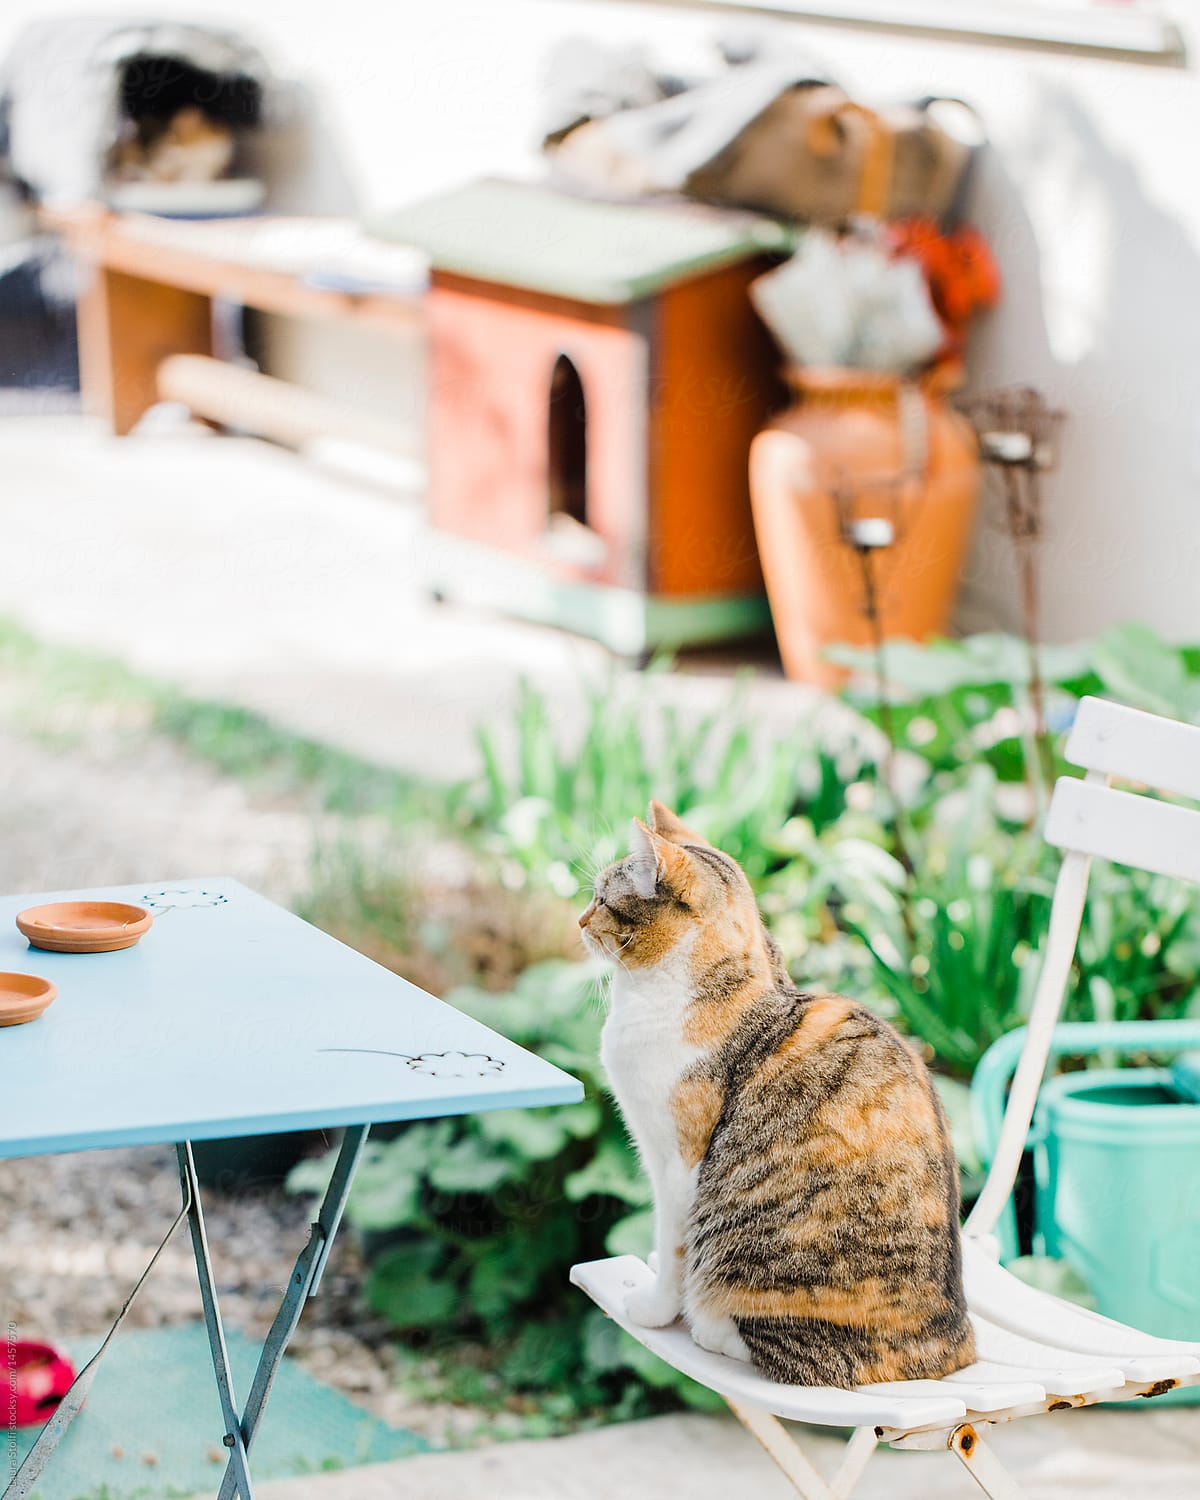 Tabby cat sits on chair at garden table